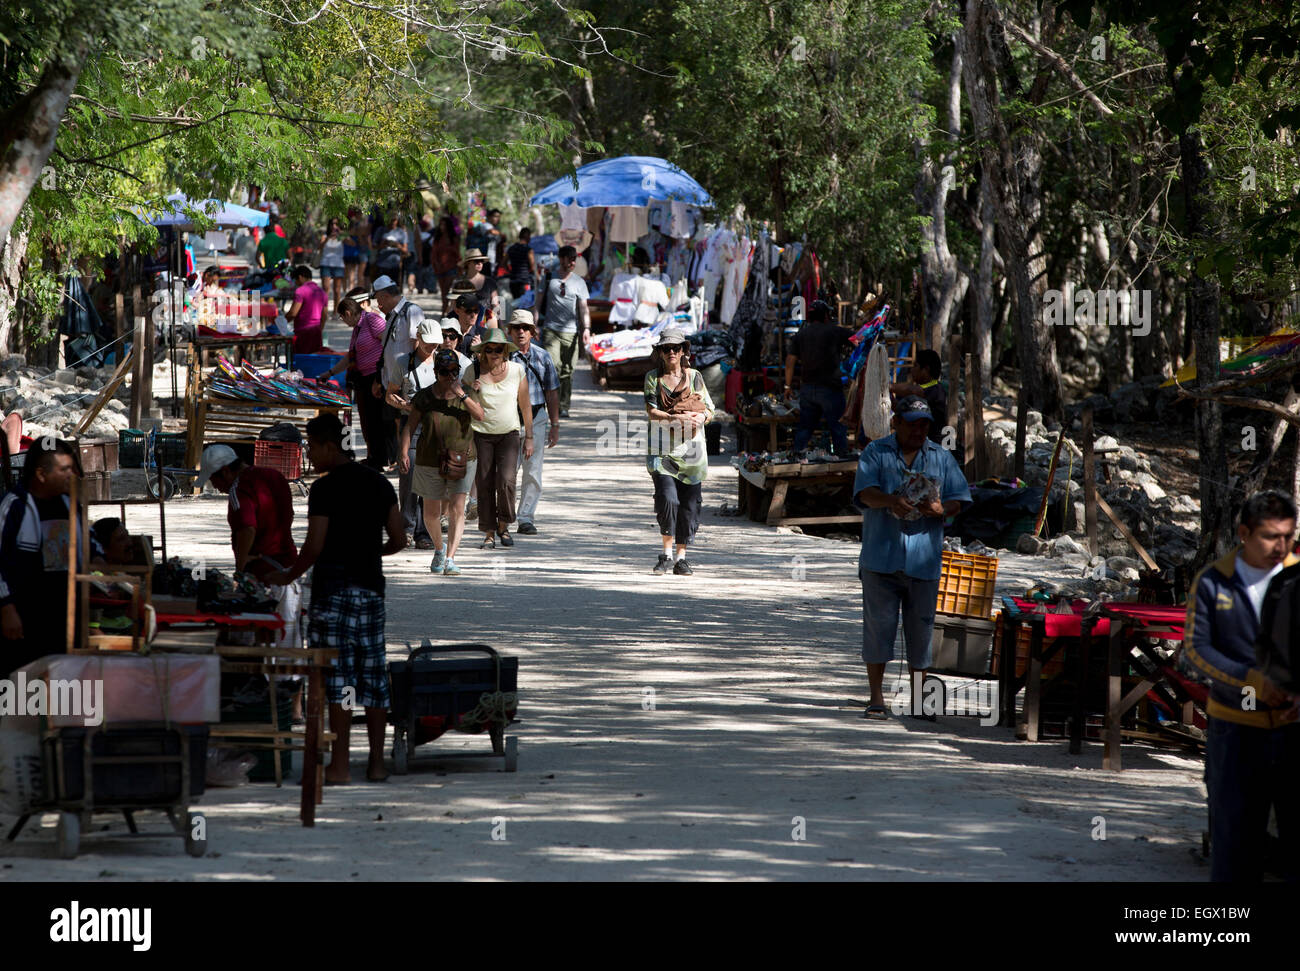 Tourists walk along a path lined with souvenir vendors at the Mayan ruins of Chichen Itza, Yucatan, Mexico Stock Photo